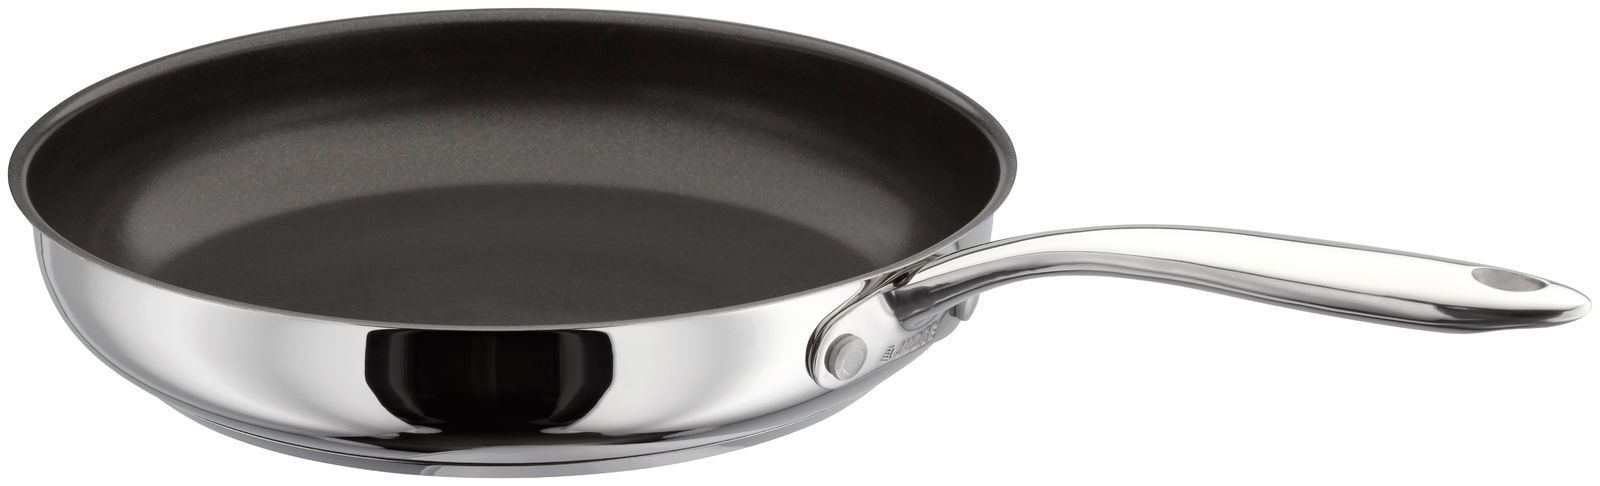 Judge-Classic-Stainless-Steel-Non-Stick-30cm-Frying-Pan